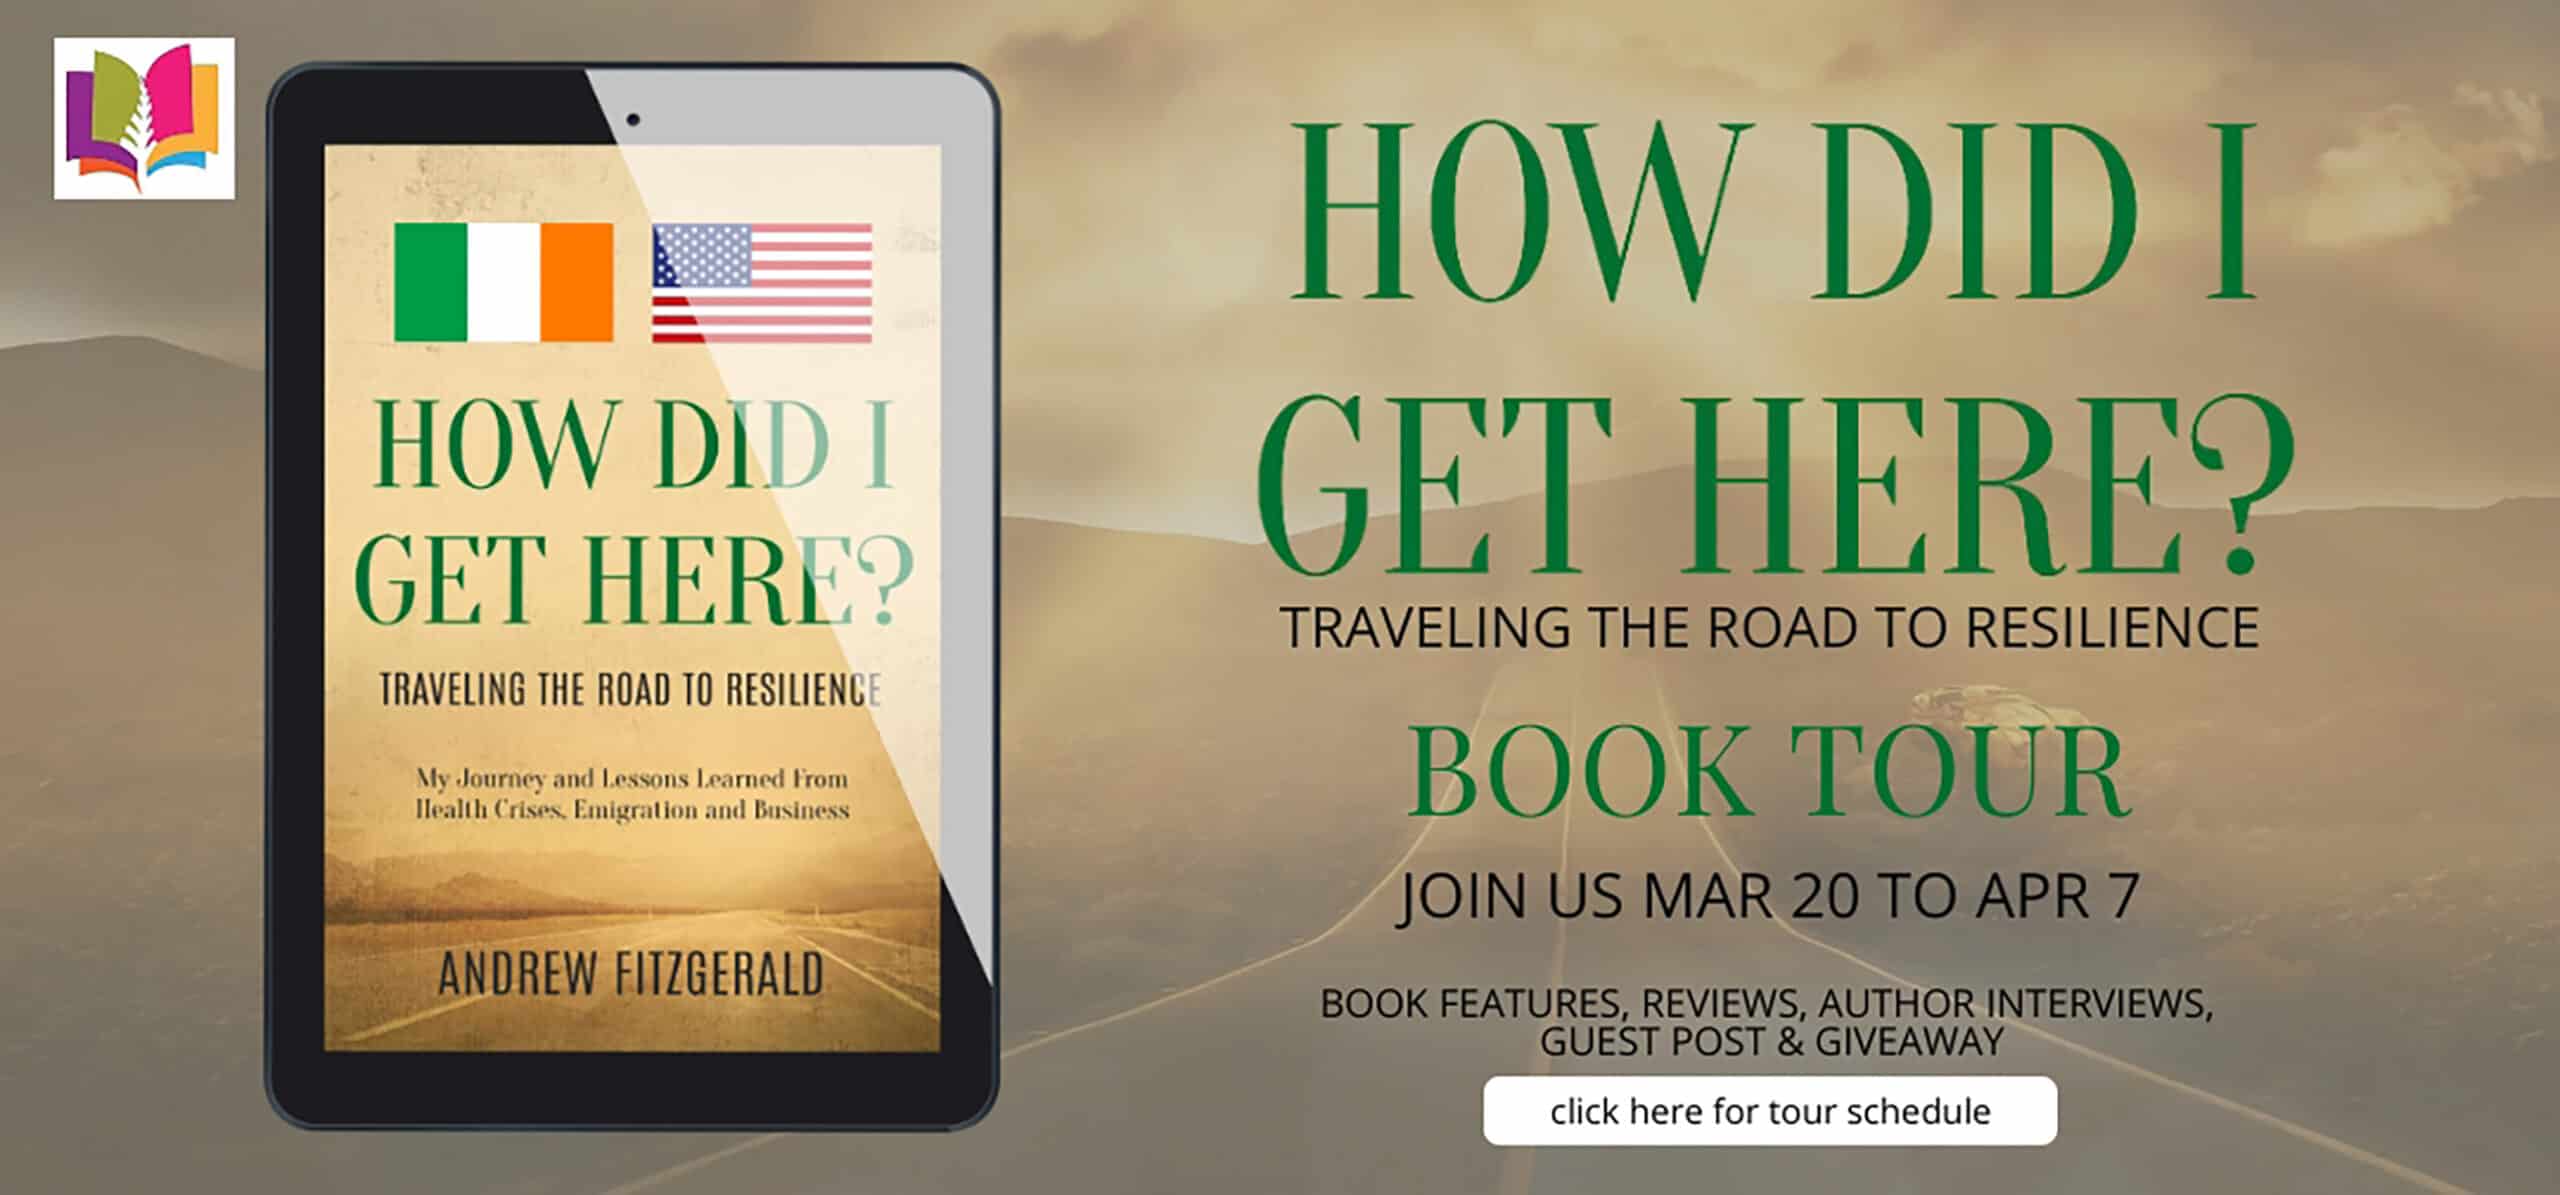 How Did I Get Here? The Road to Resilience by Andrew Fitzgerald | Book Review ~ Author Guest Post ~ $25 Gift Card & Signed Book Opportunity